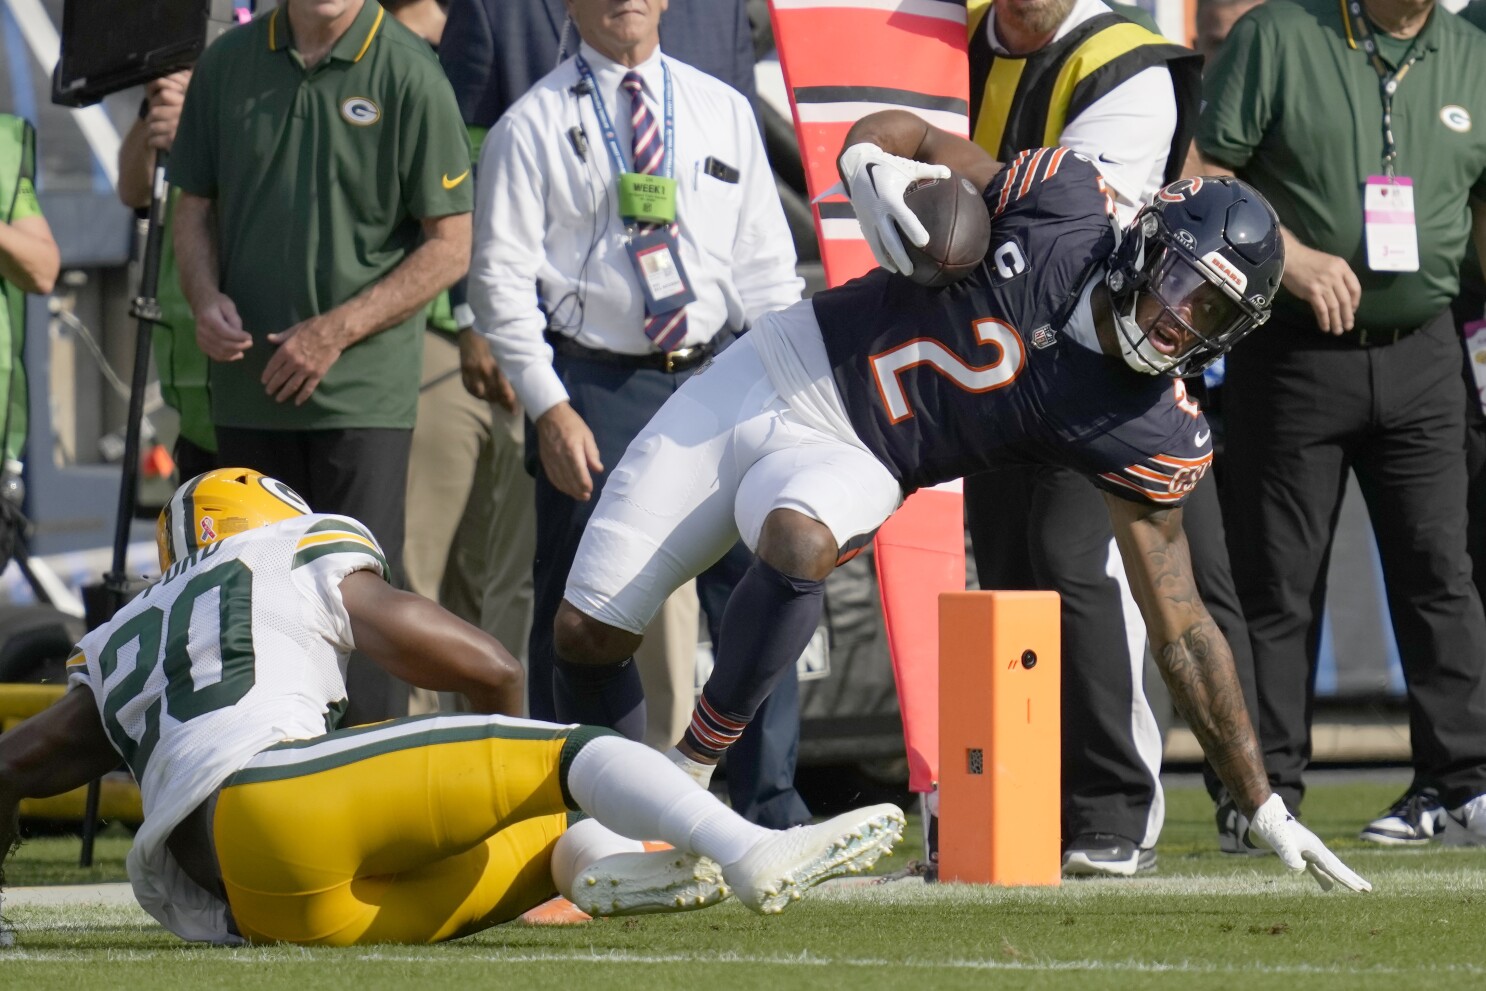 The Bears thought they had improved in the offseason, but they didn't show  it in Week 1